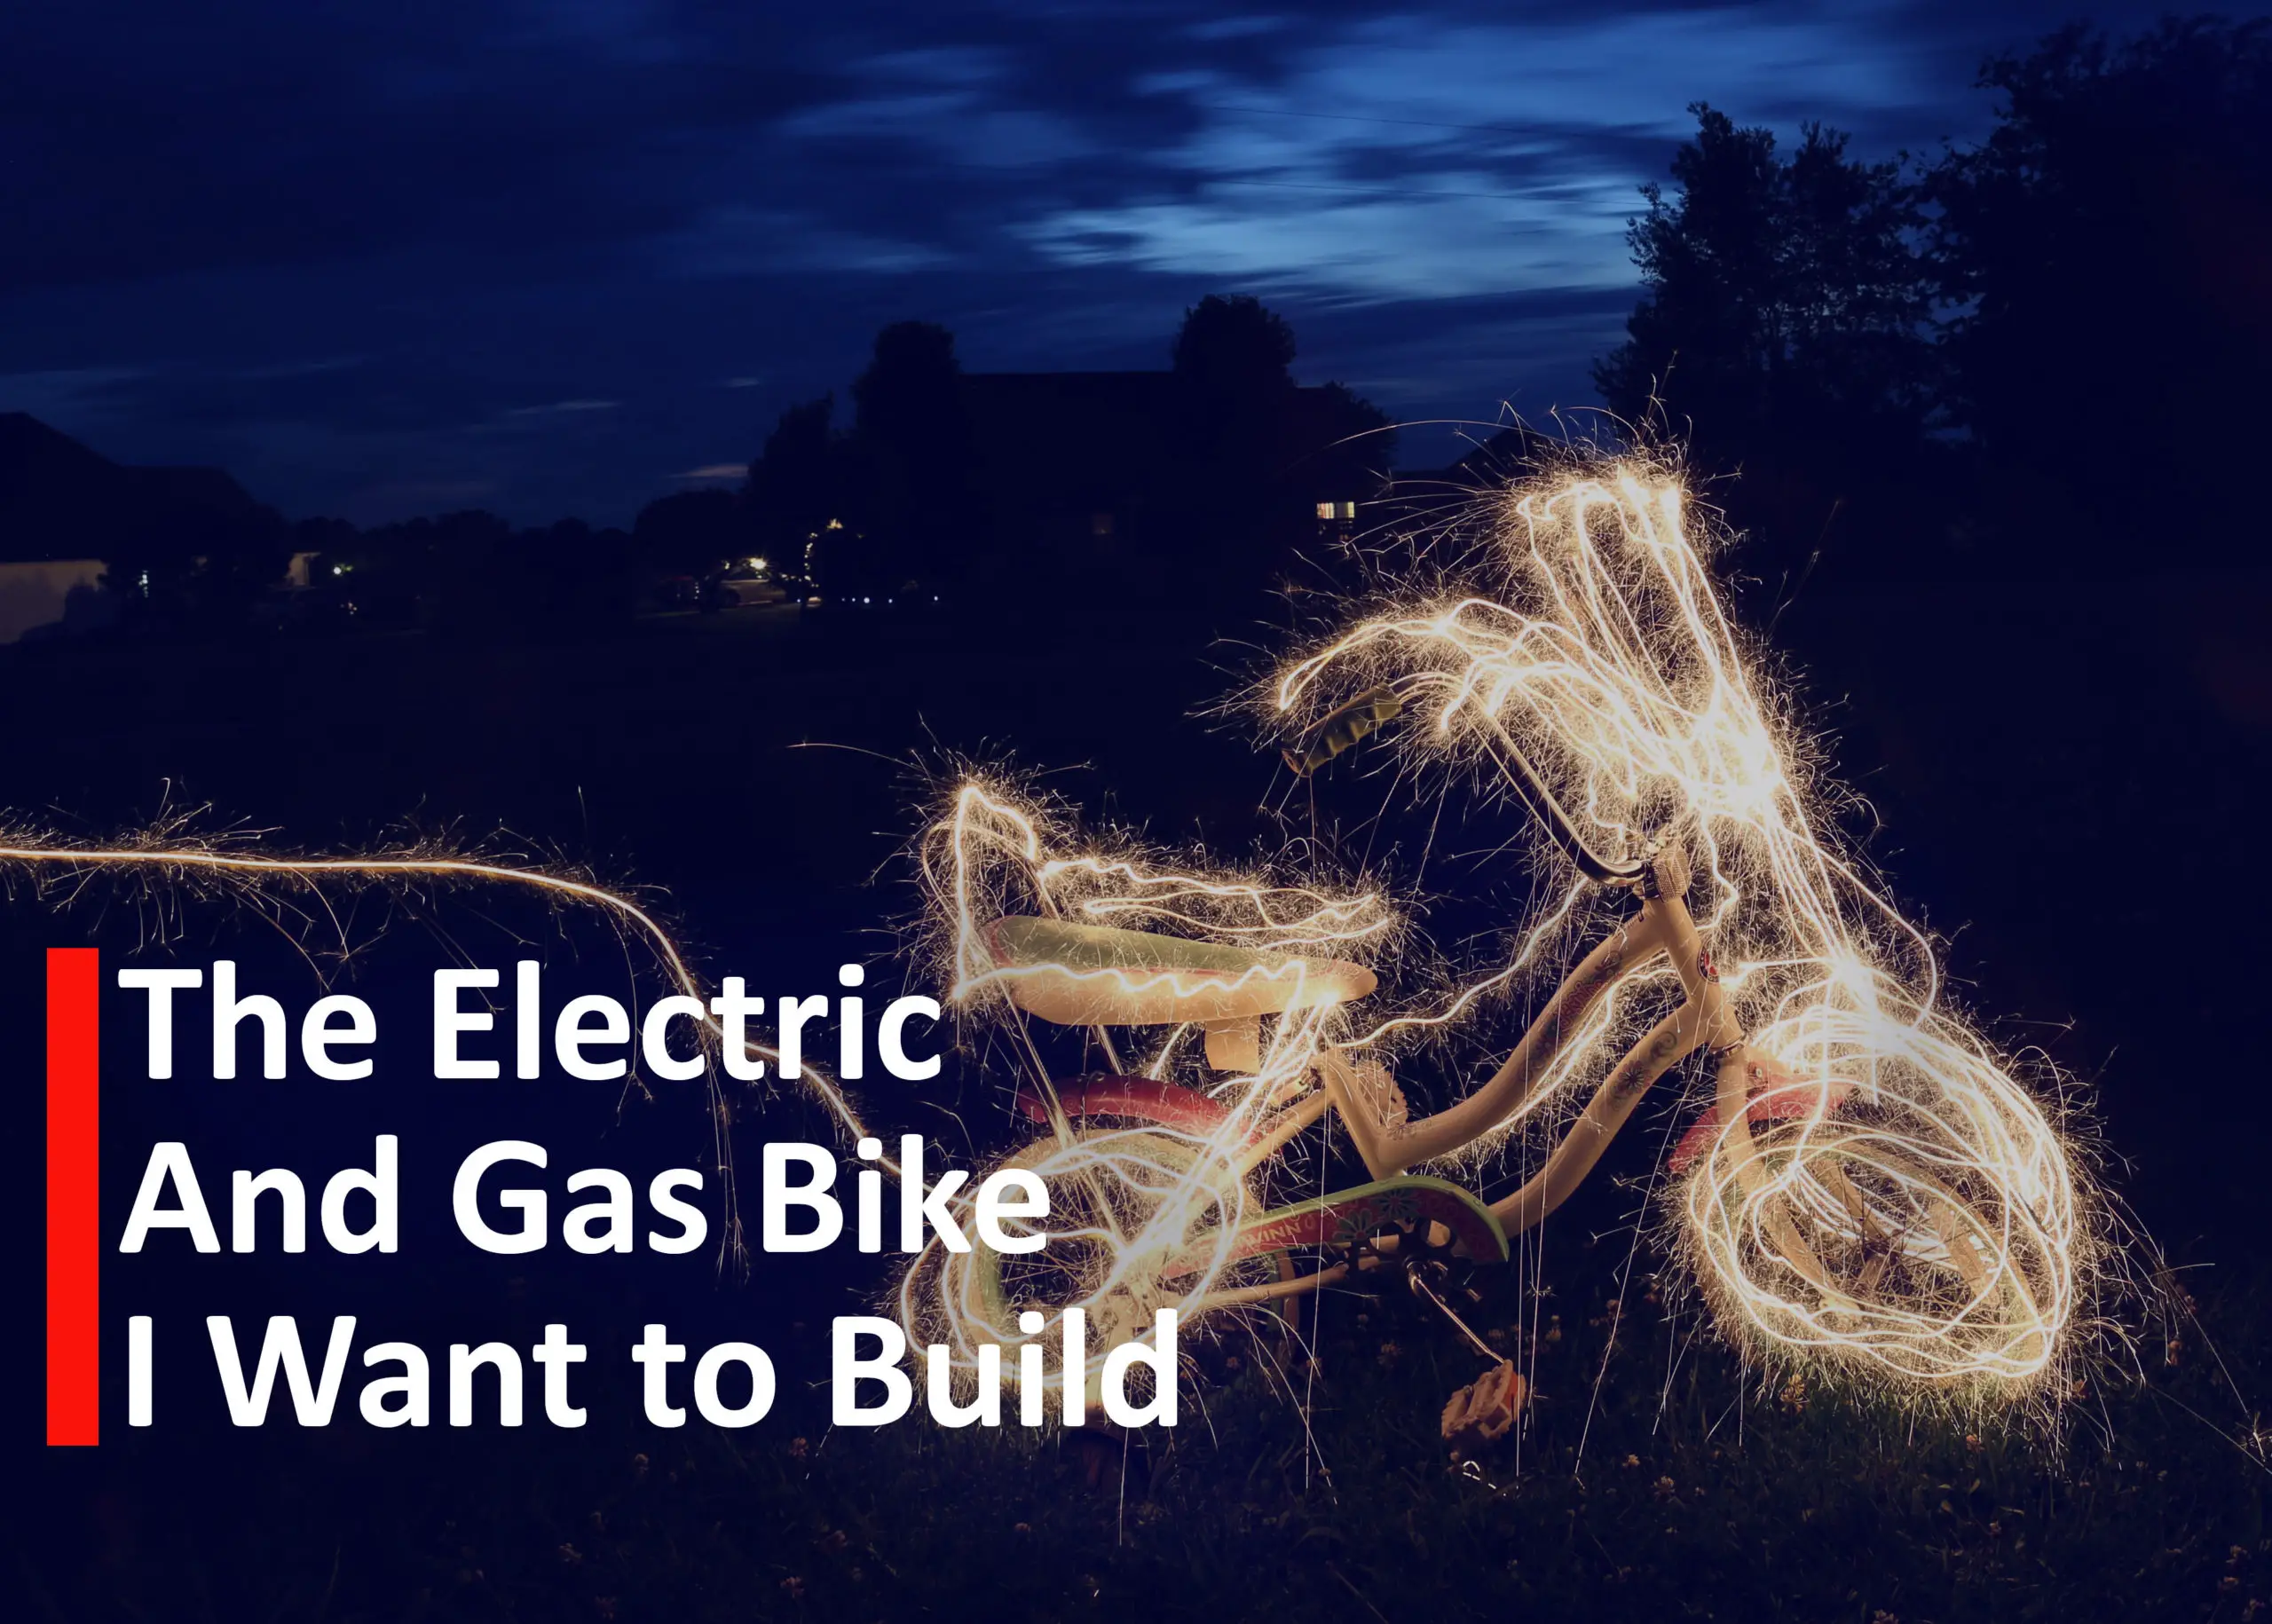 The Electric and Gas Bike I Want to Build